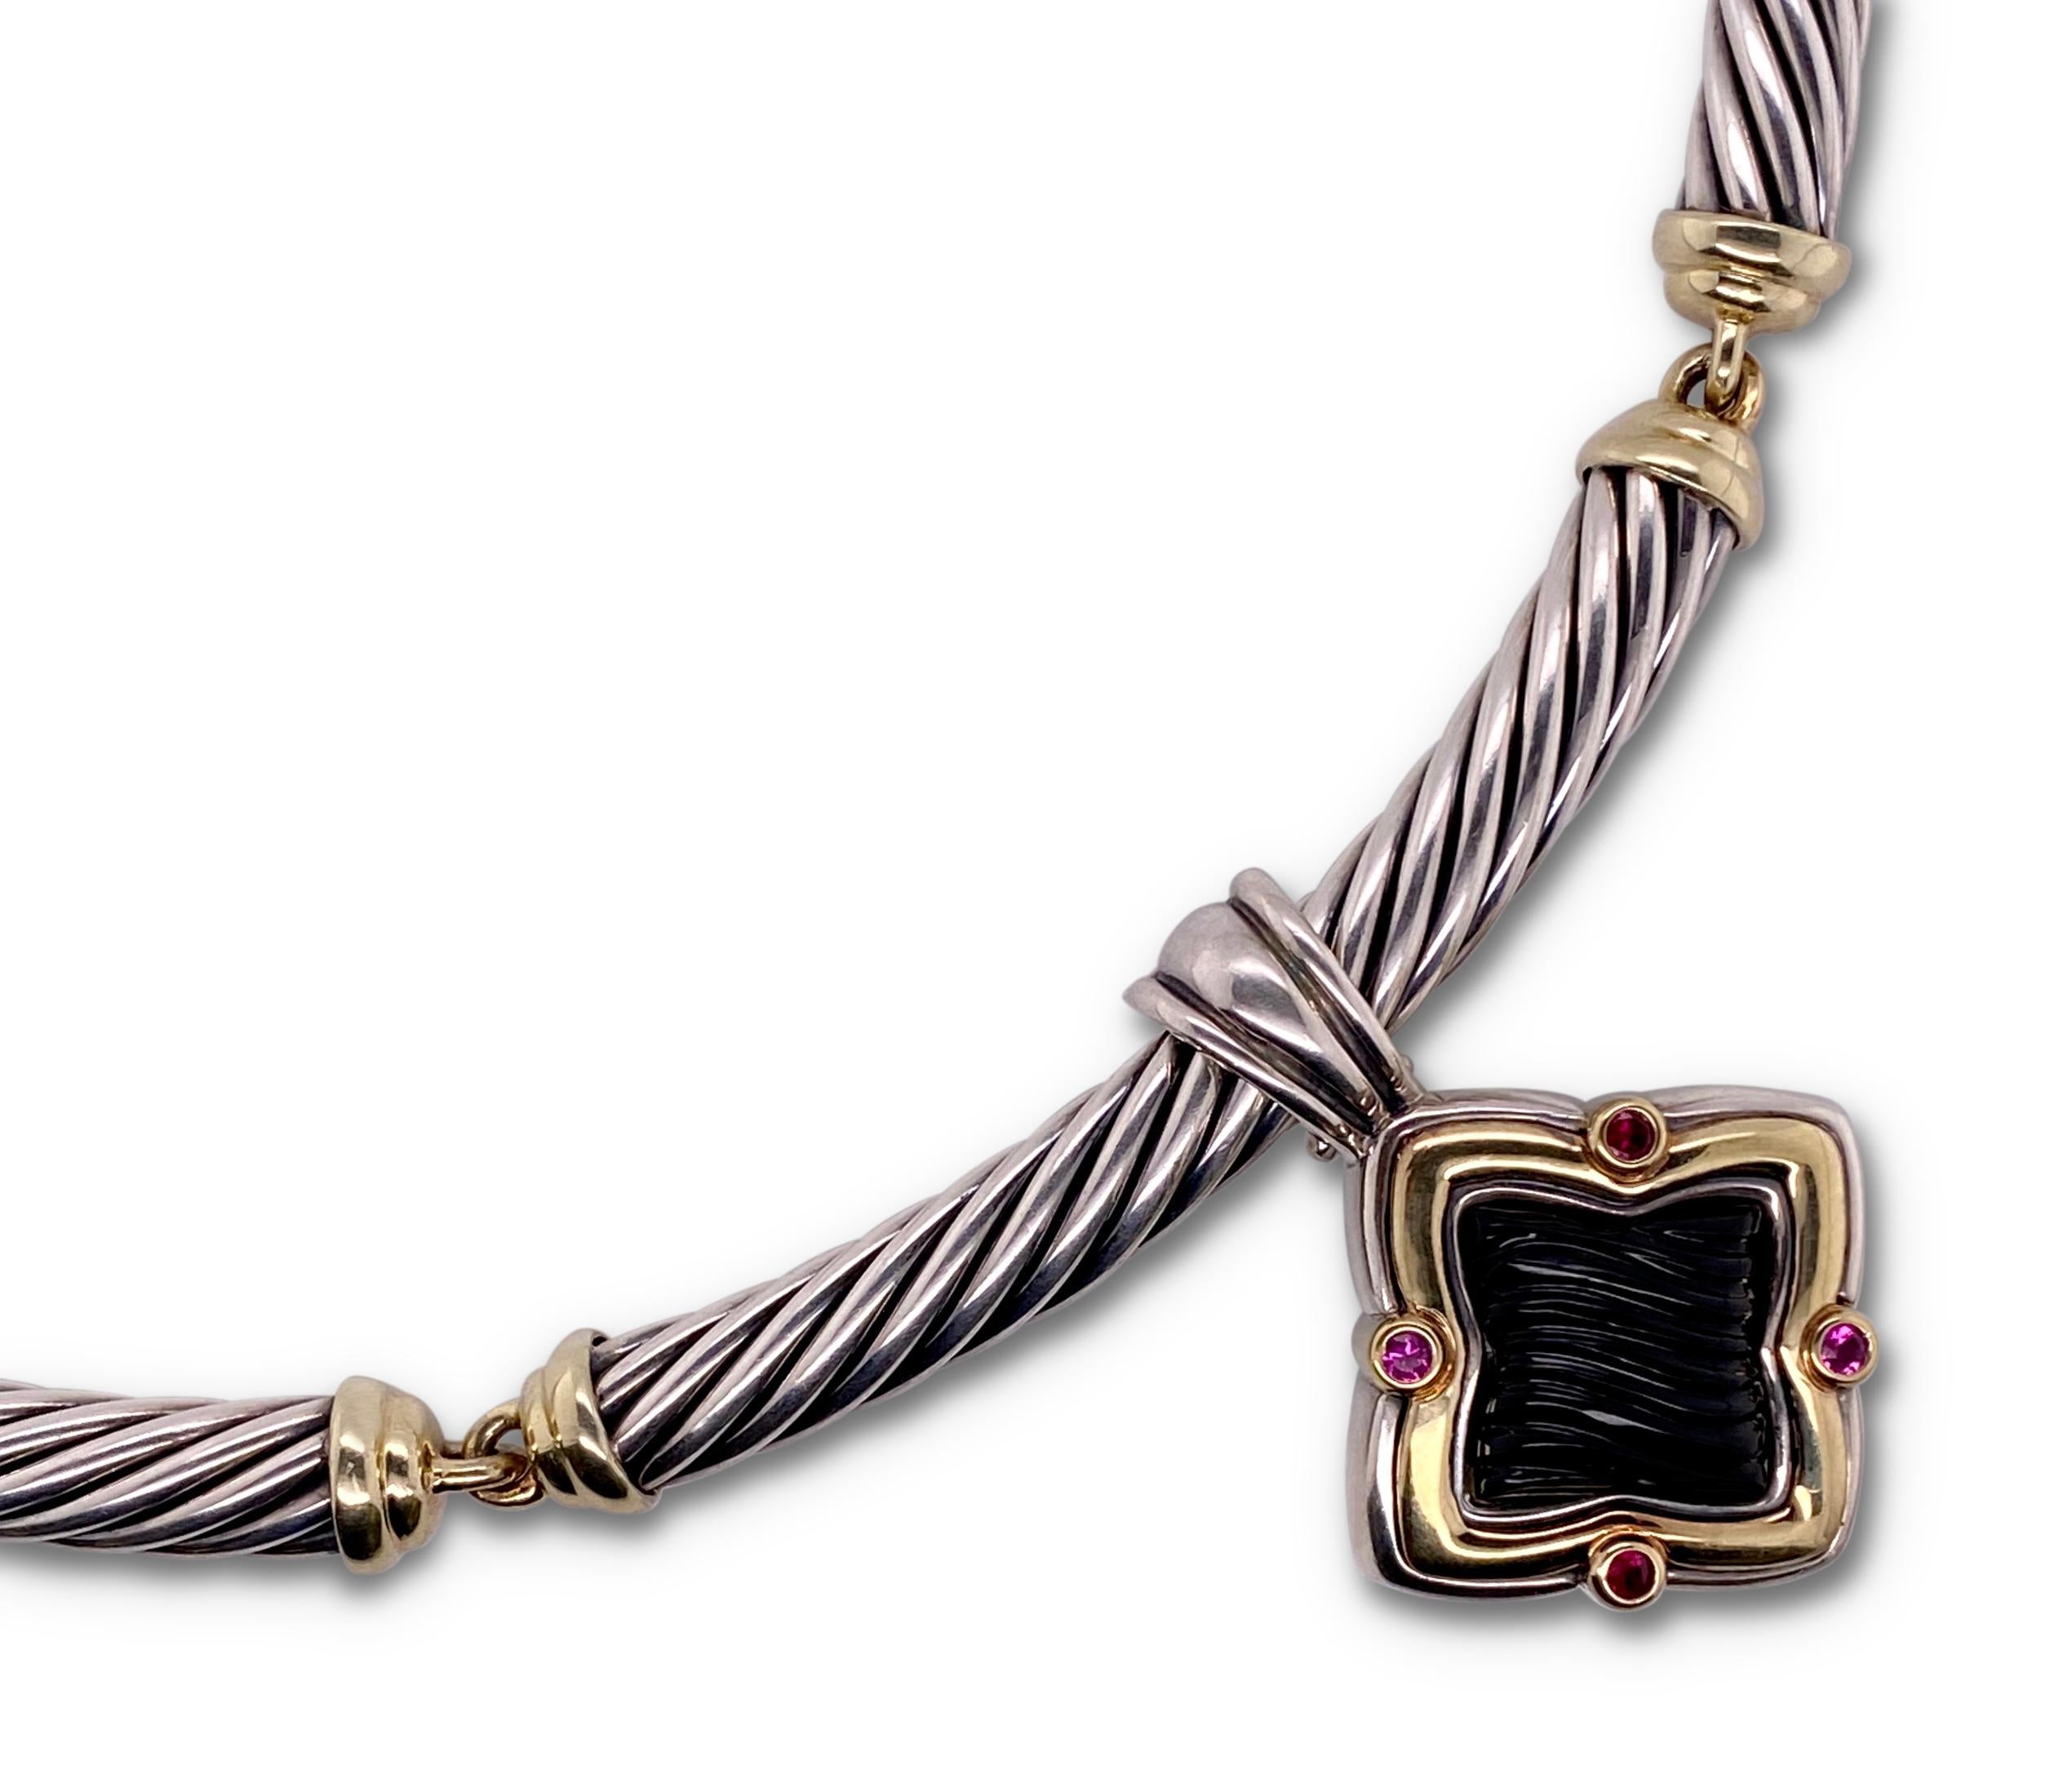 Authentic David Yurman 6mm cable choker necklace crafted in sterling silver with 14 karat yellow gold.  Necklace features a quatrefoil shaped pendant crafted in 18 karat yellow gold and sterling silver with a large textured onyx center and 4